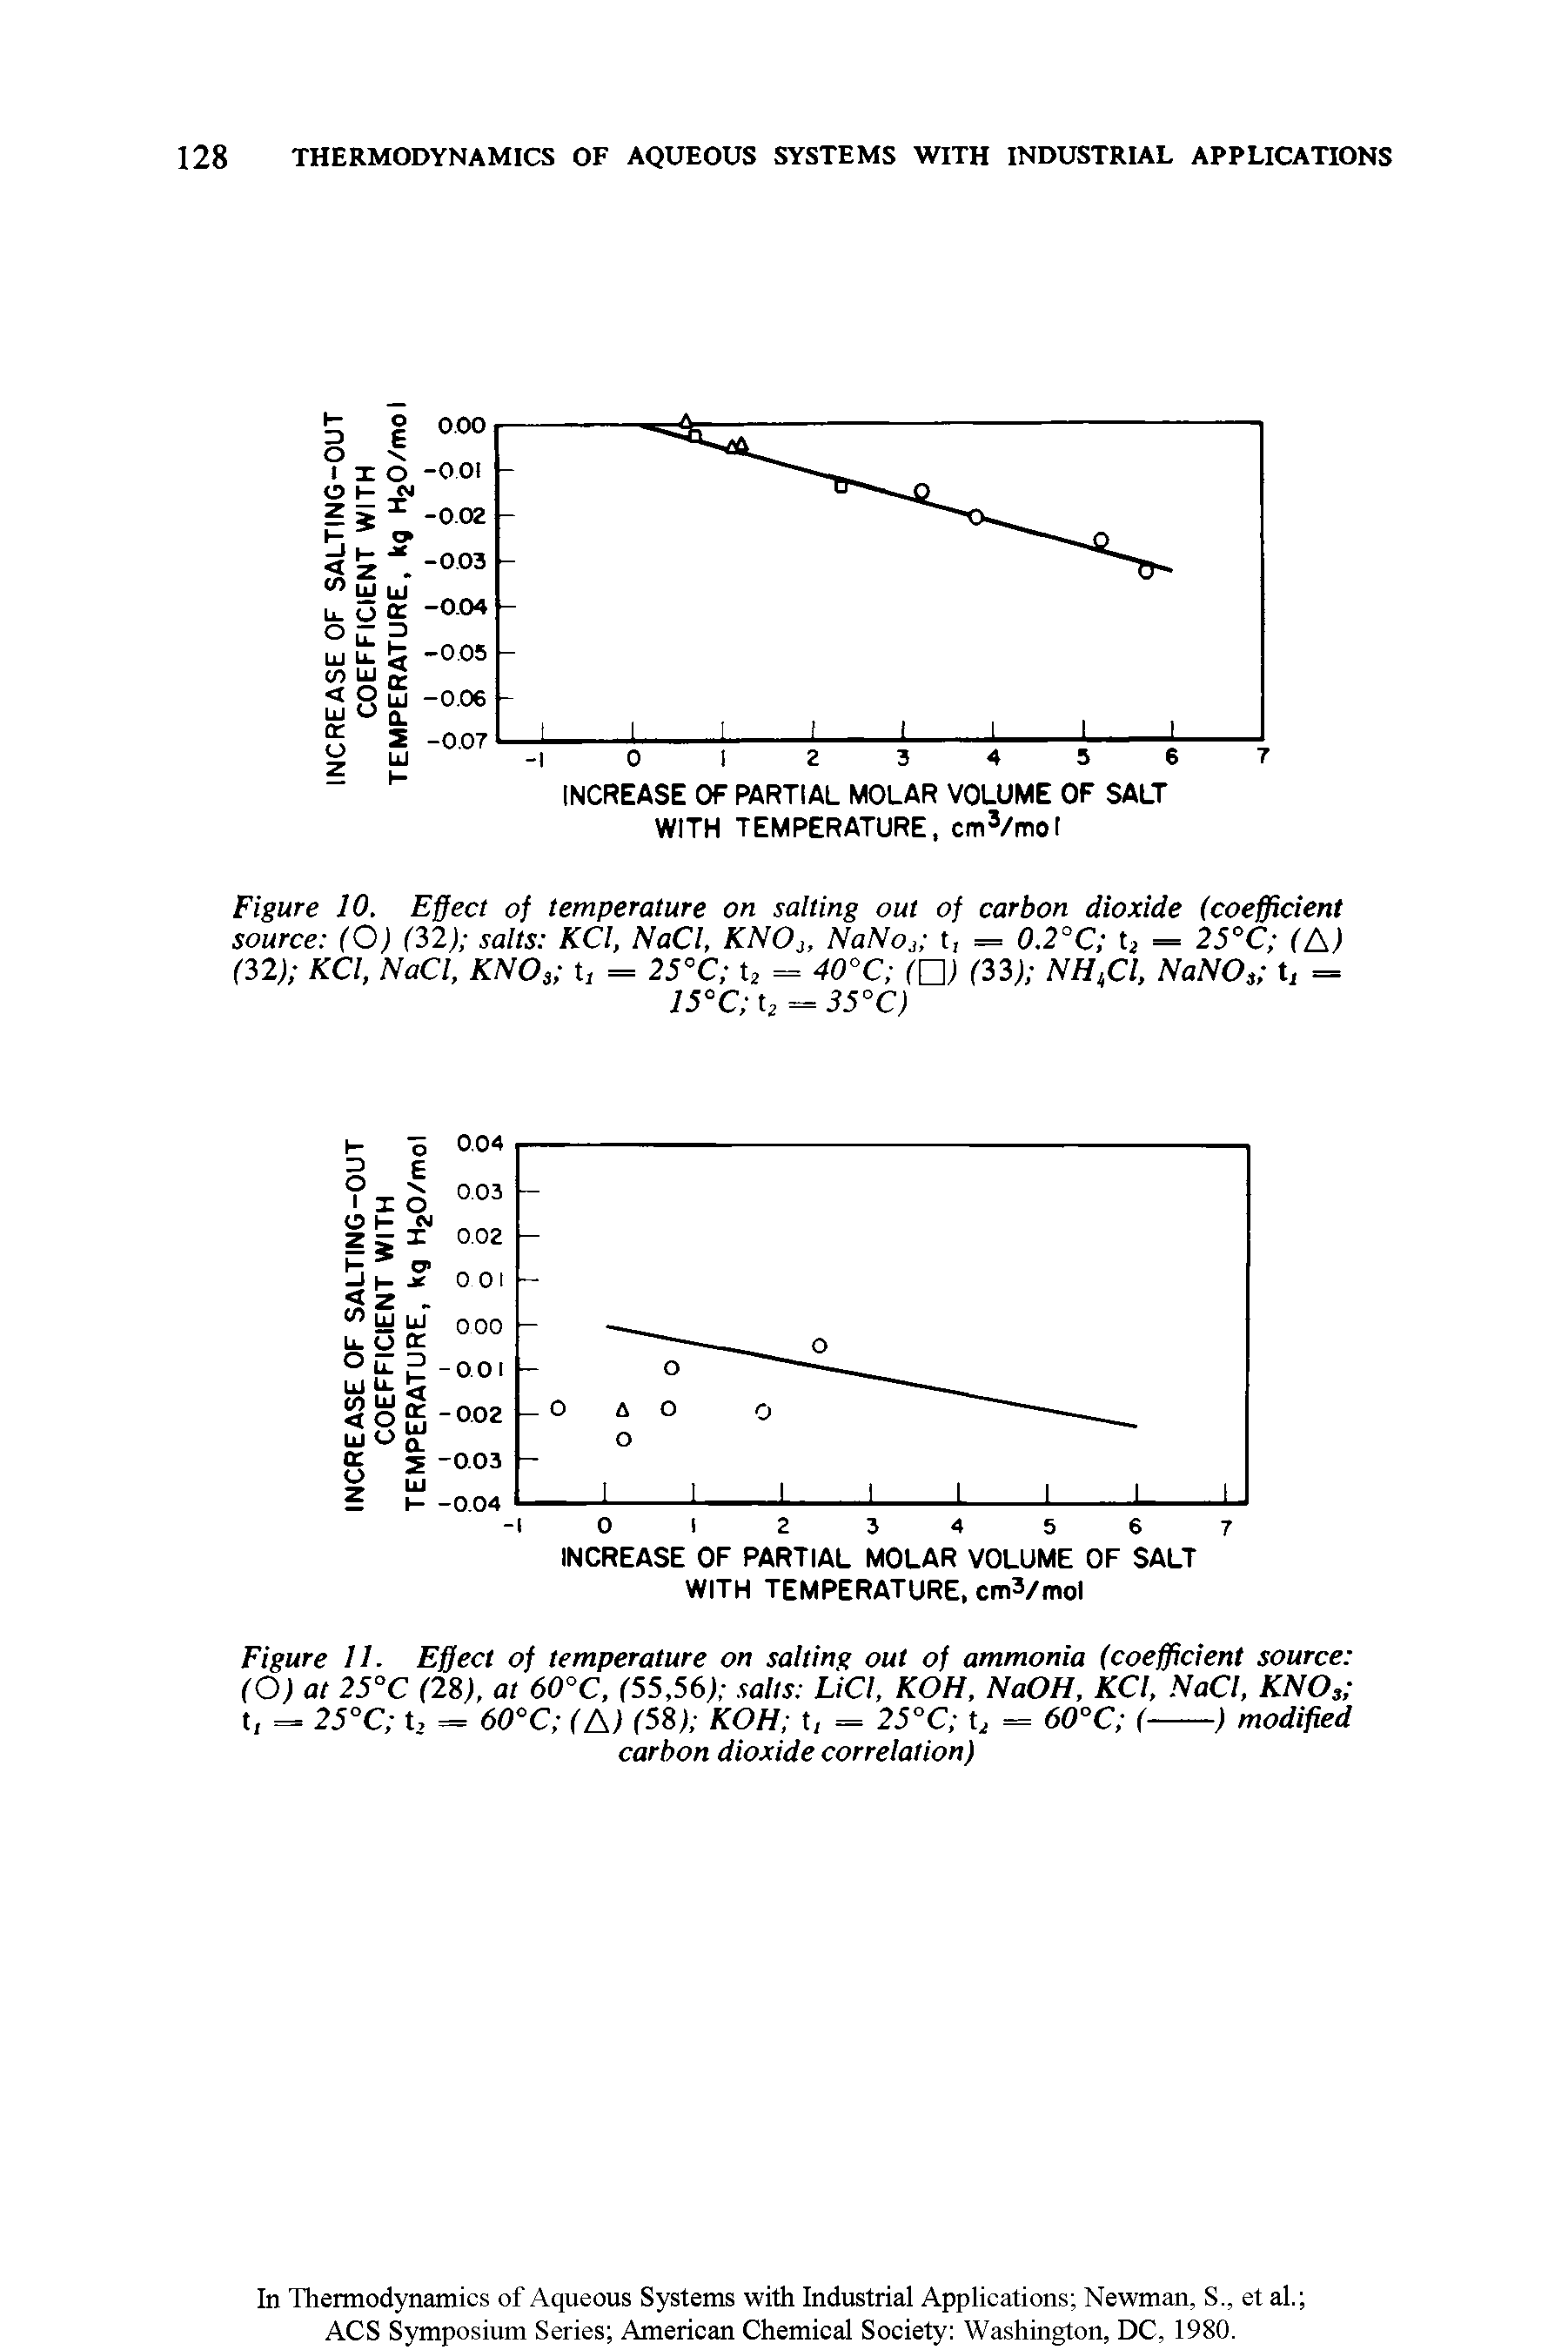 Figure 11. Effect of temperature on salting out of ammonia (coefficient source (O) at 25°C (28), at 60°C, 155,561 salts LiCl, KOH, NaOH, KCl, NaCl, KNO, ...